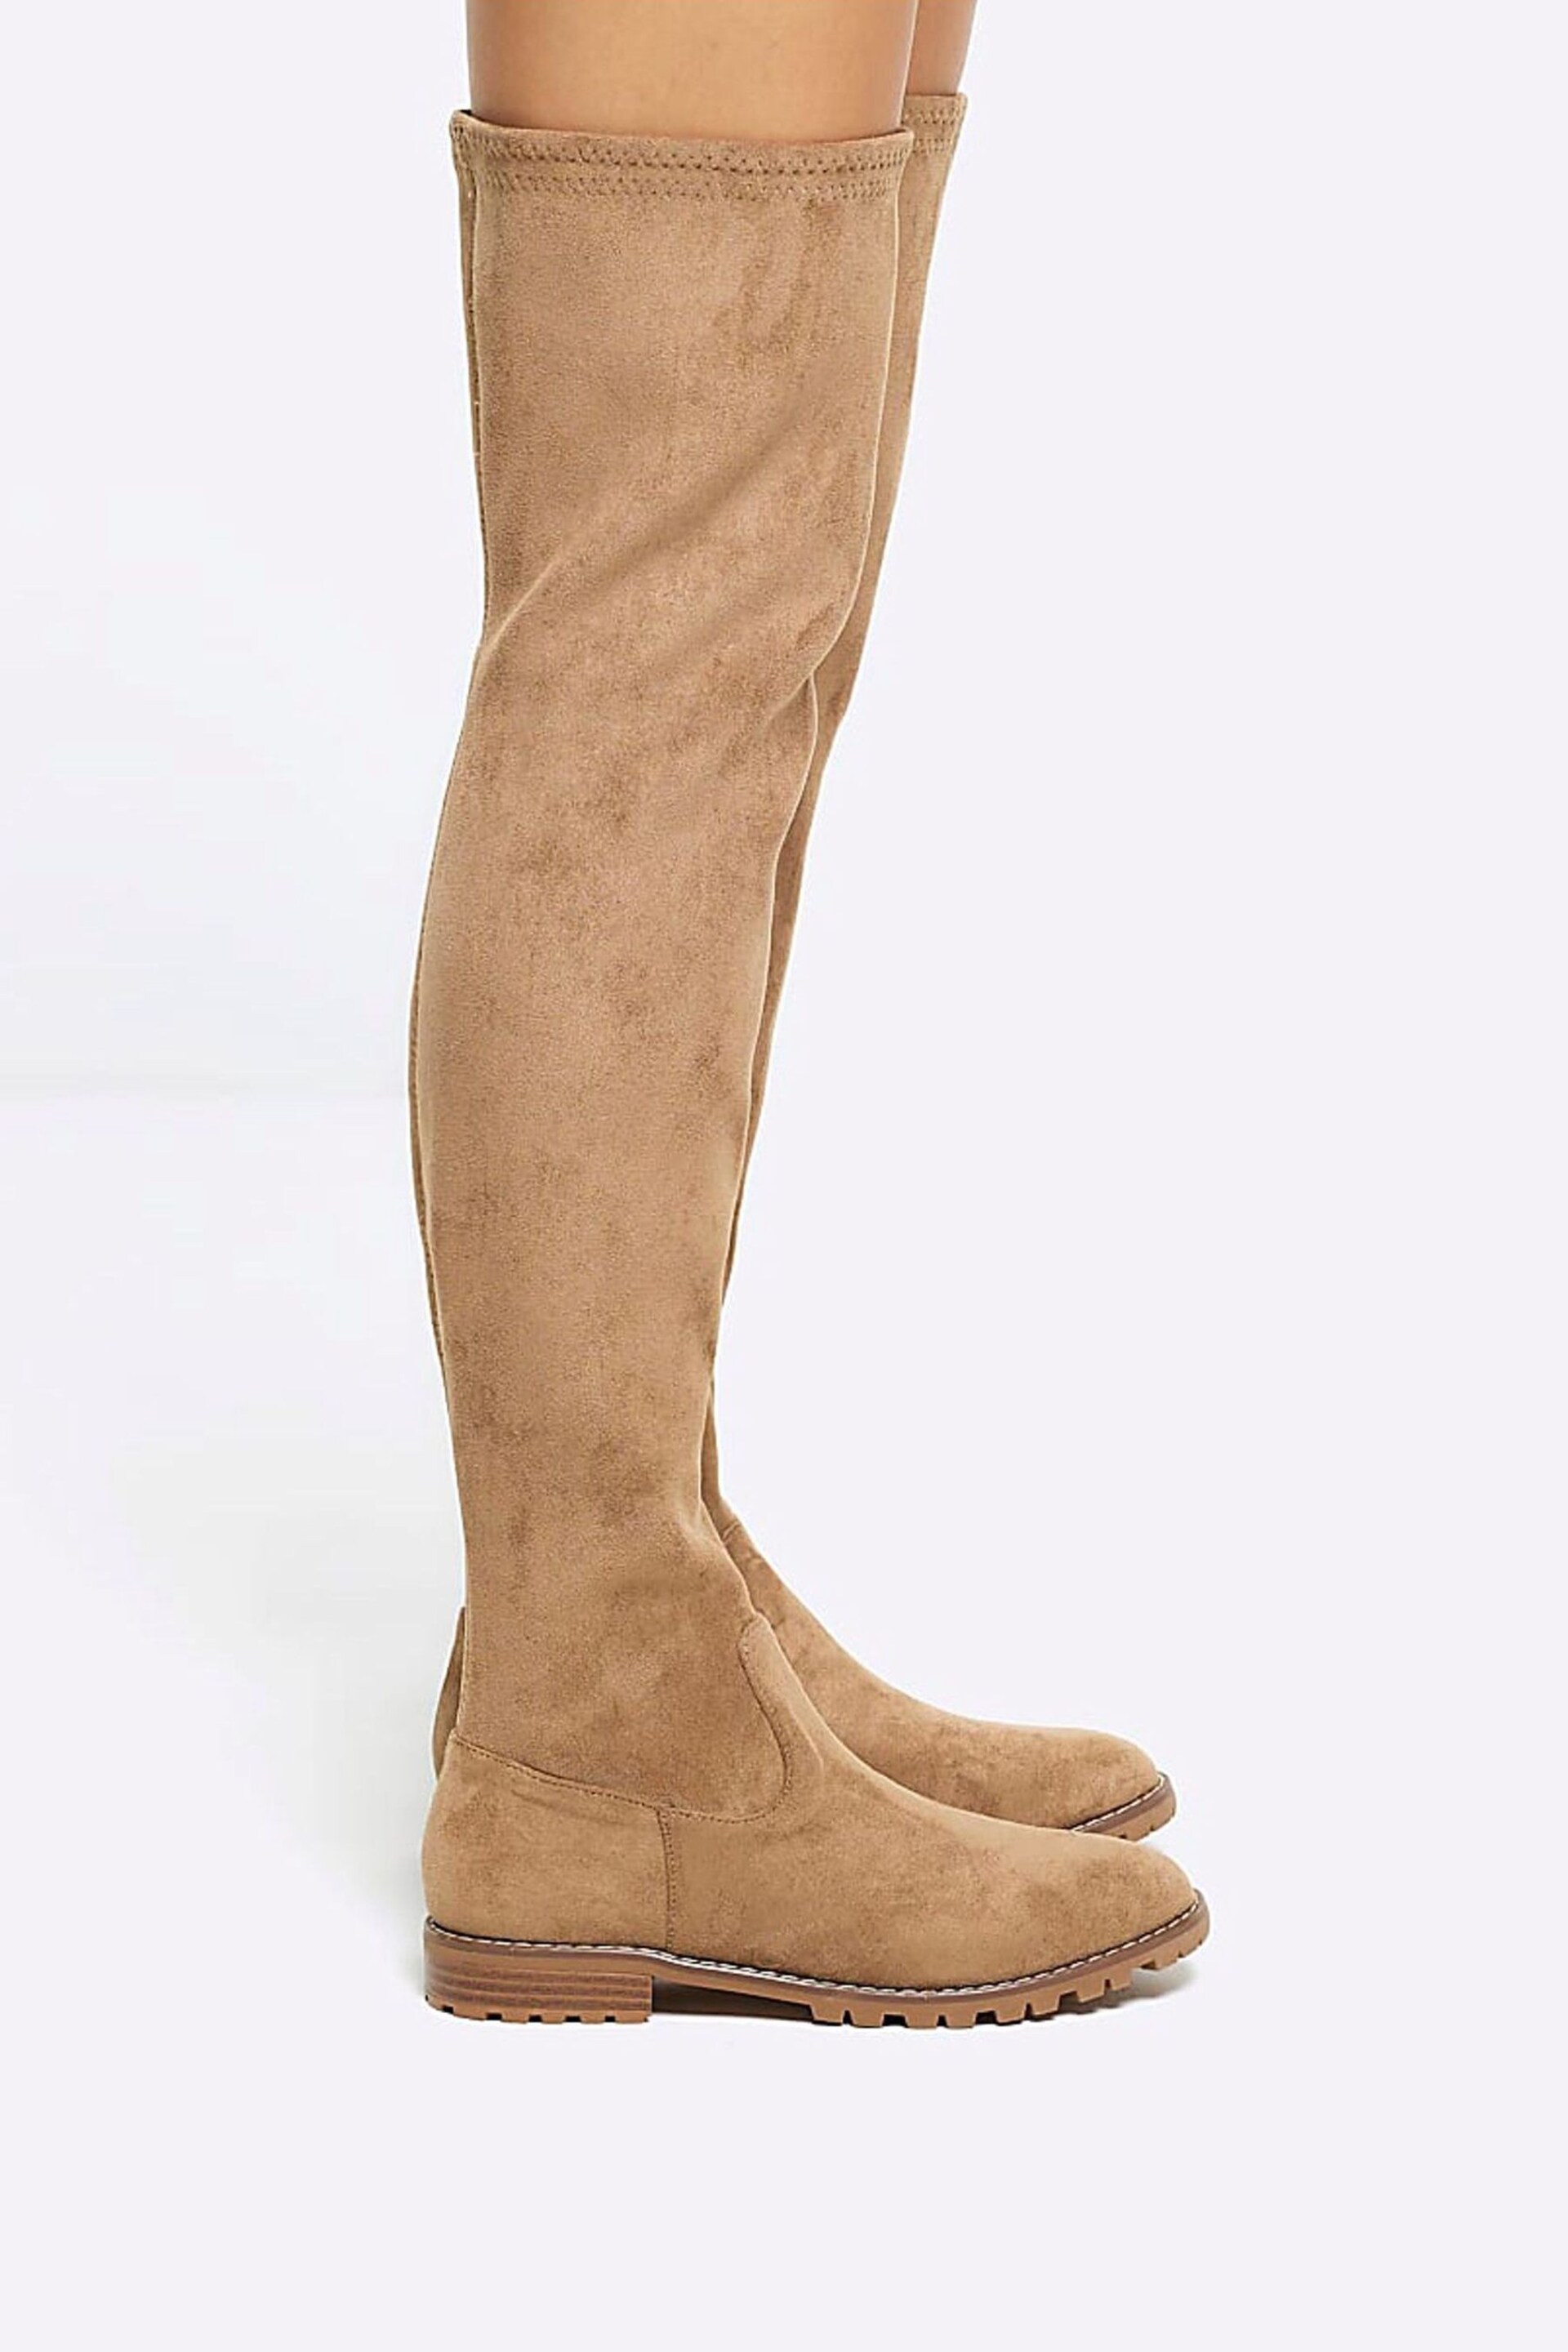 River Island Brown Suedette Over The Knee Boots - Image 6 of 6